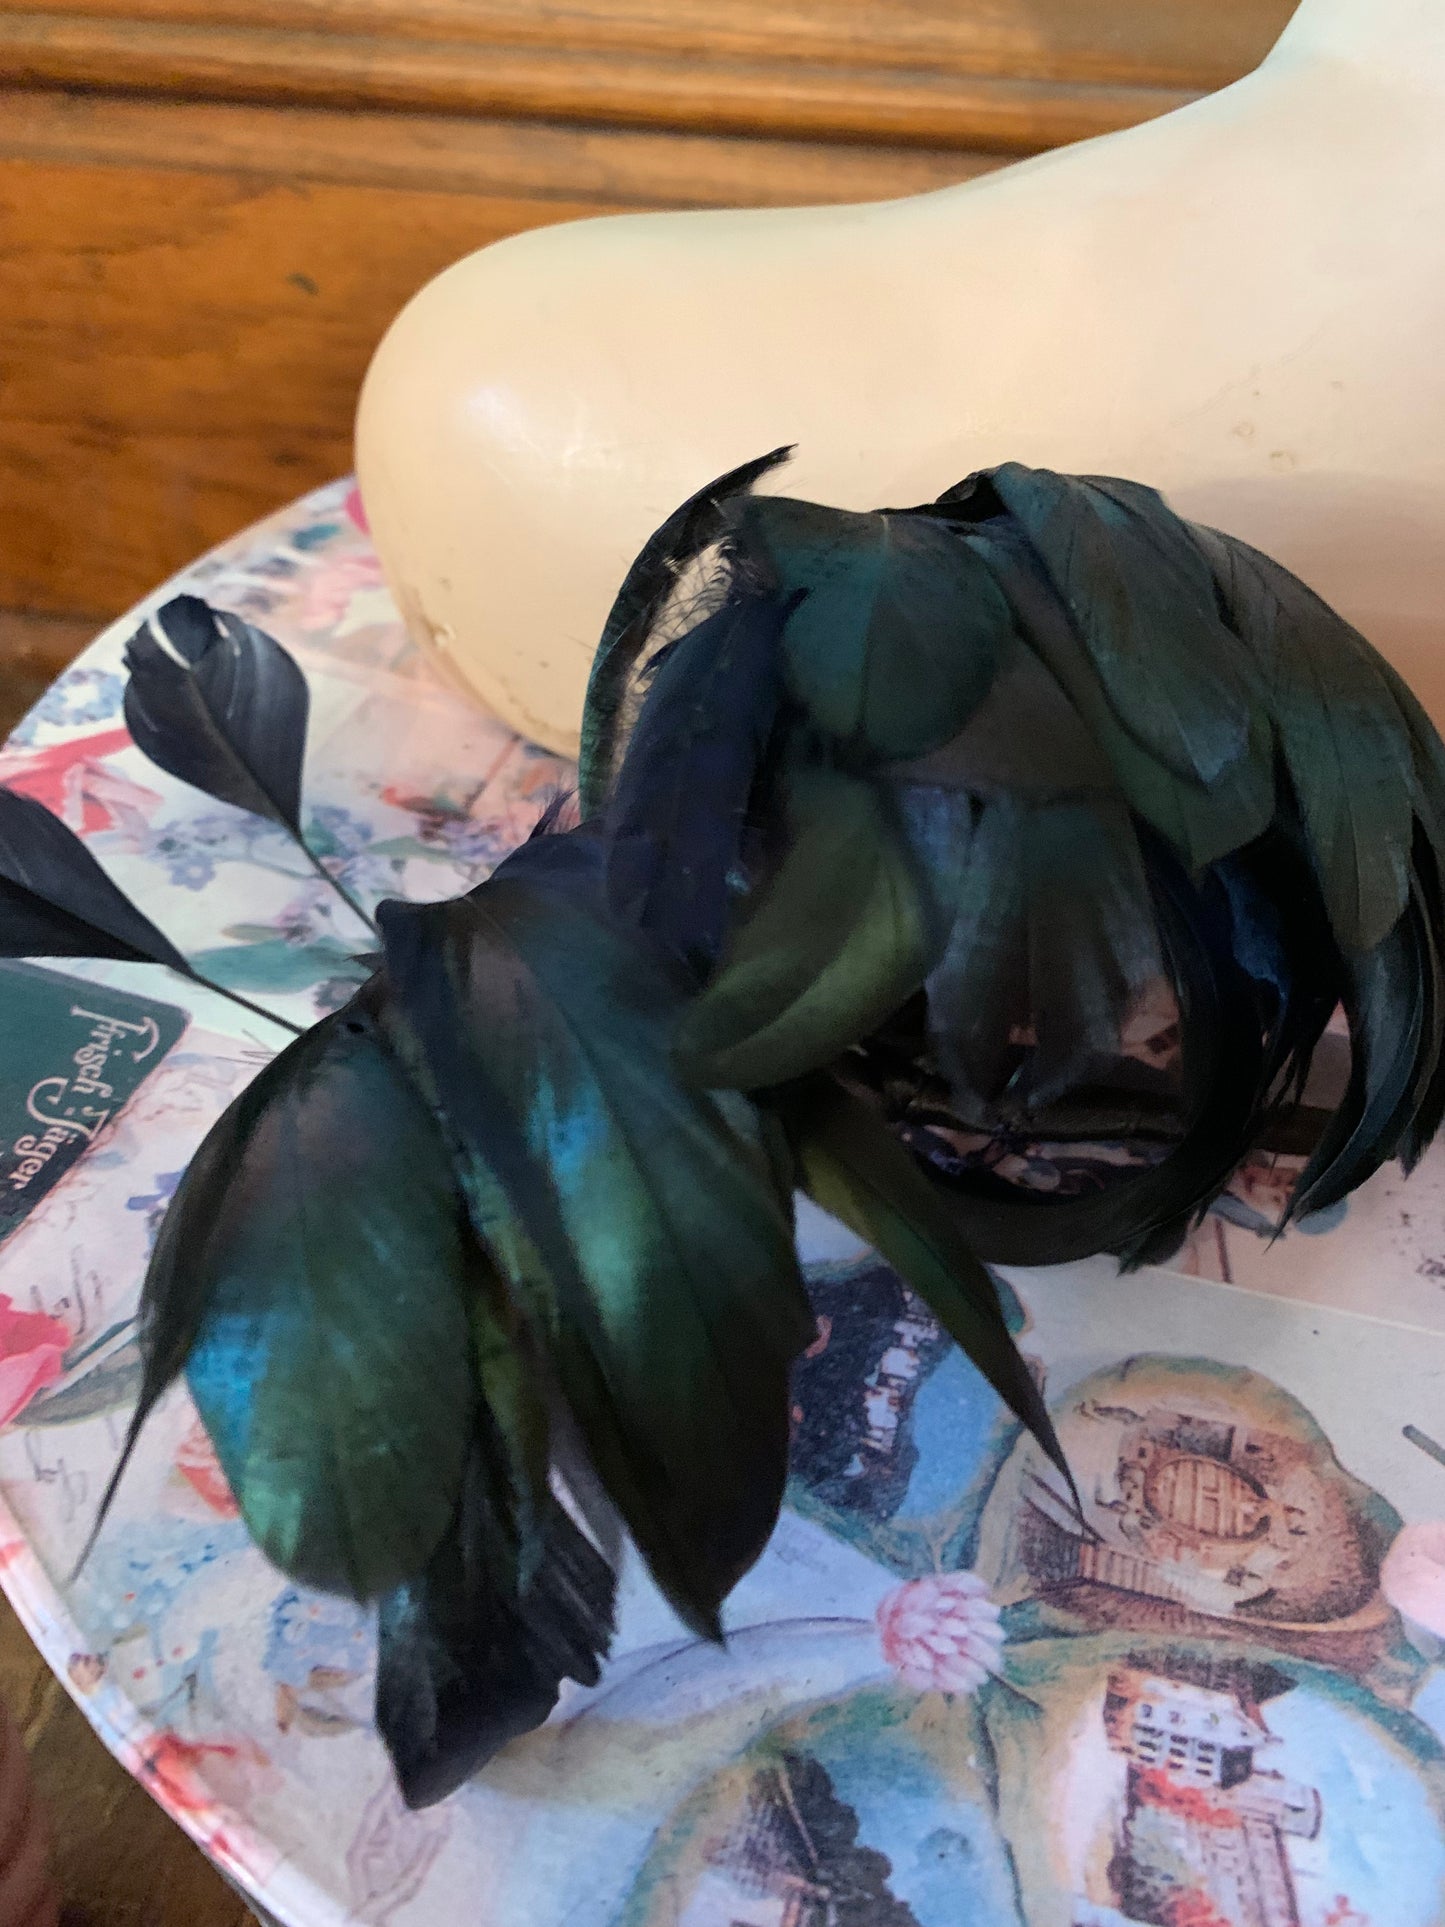 Iridescent Curled Coq Feather Hair Piece circa 1890s